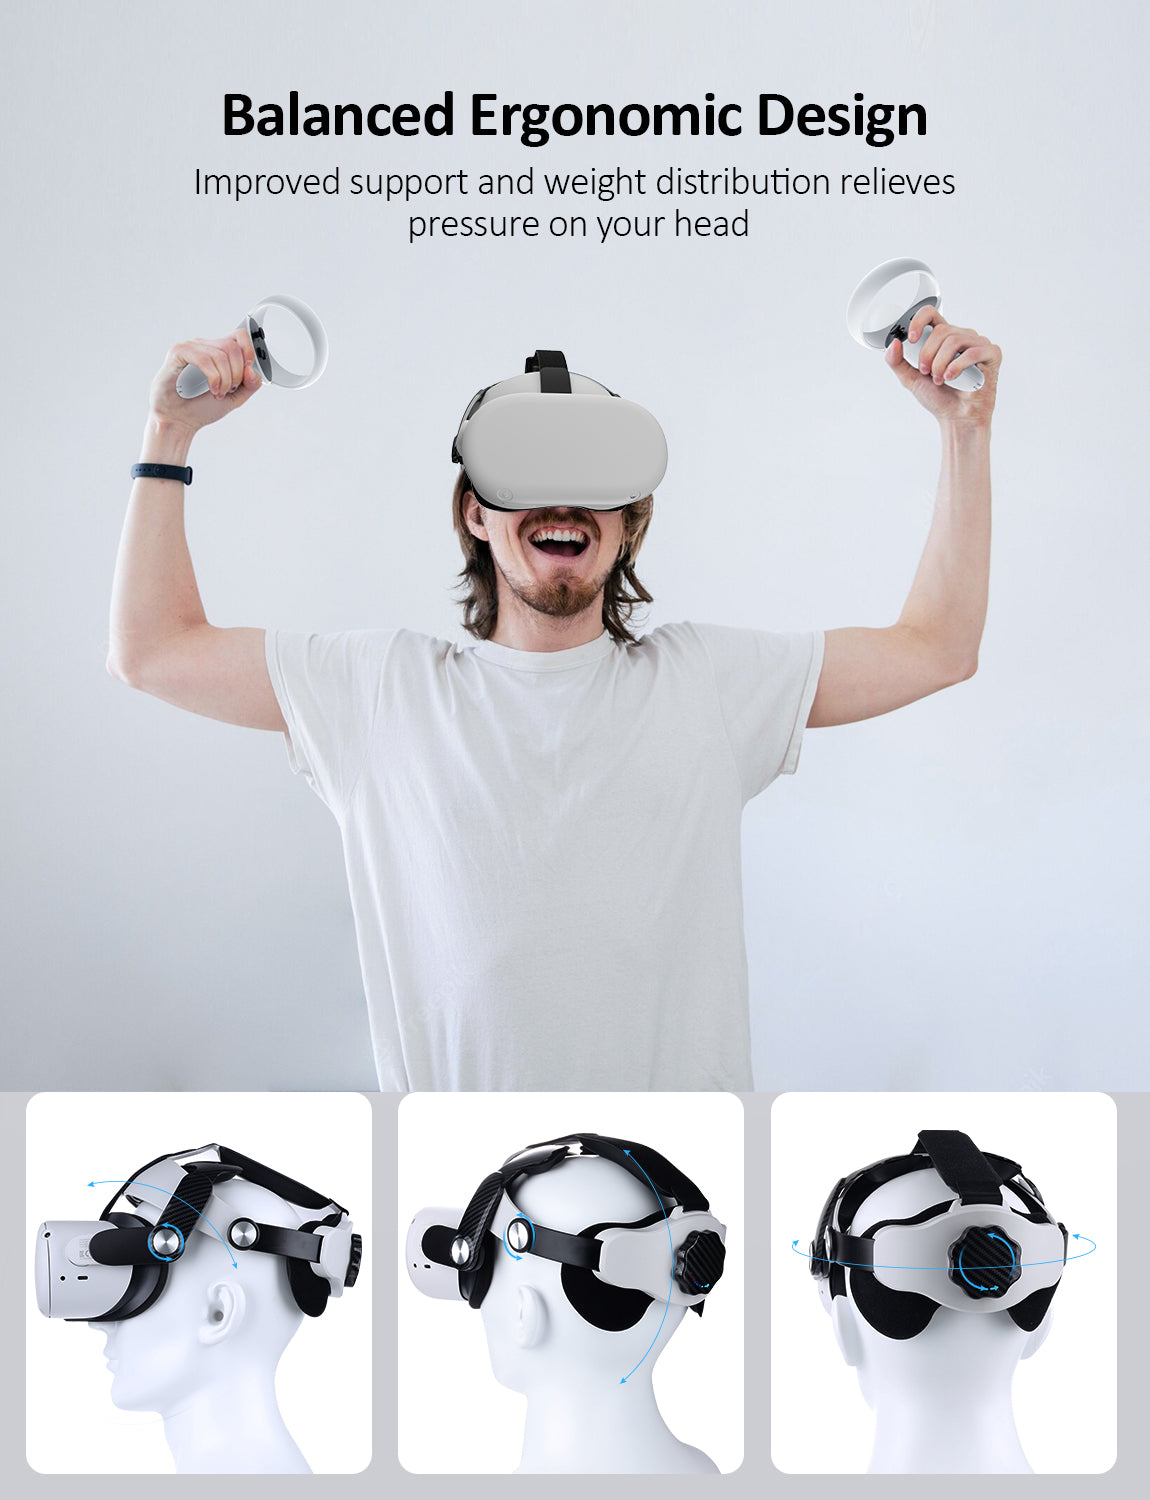 This headset can relieve pressure on your head when playing games.